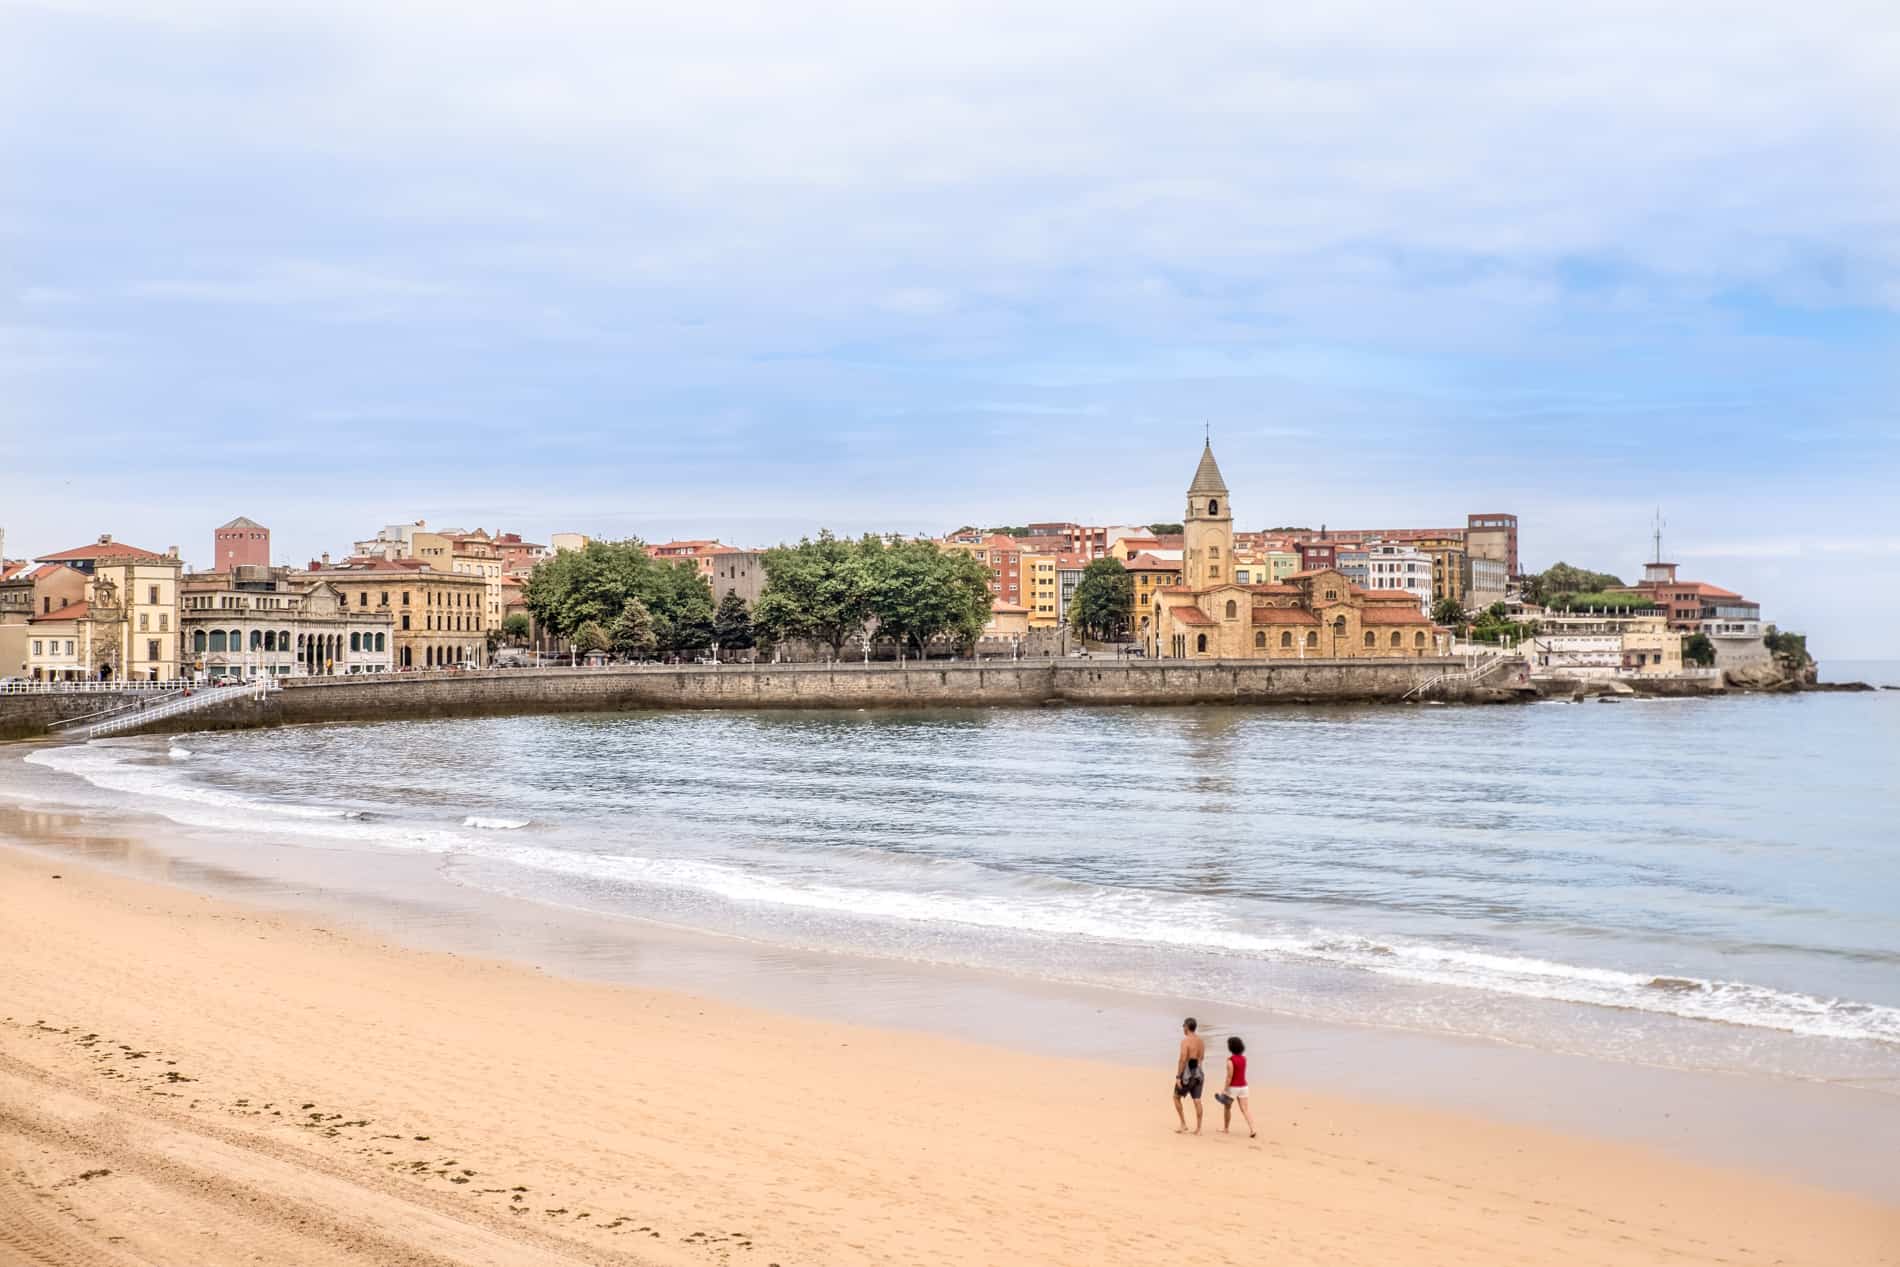 Two people walk along the beach in front of the old town of Gijón, whose pastel coloured buildings stand next to the sea. 